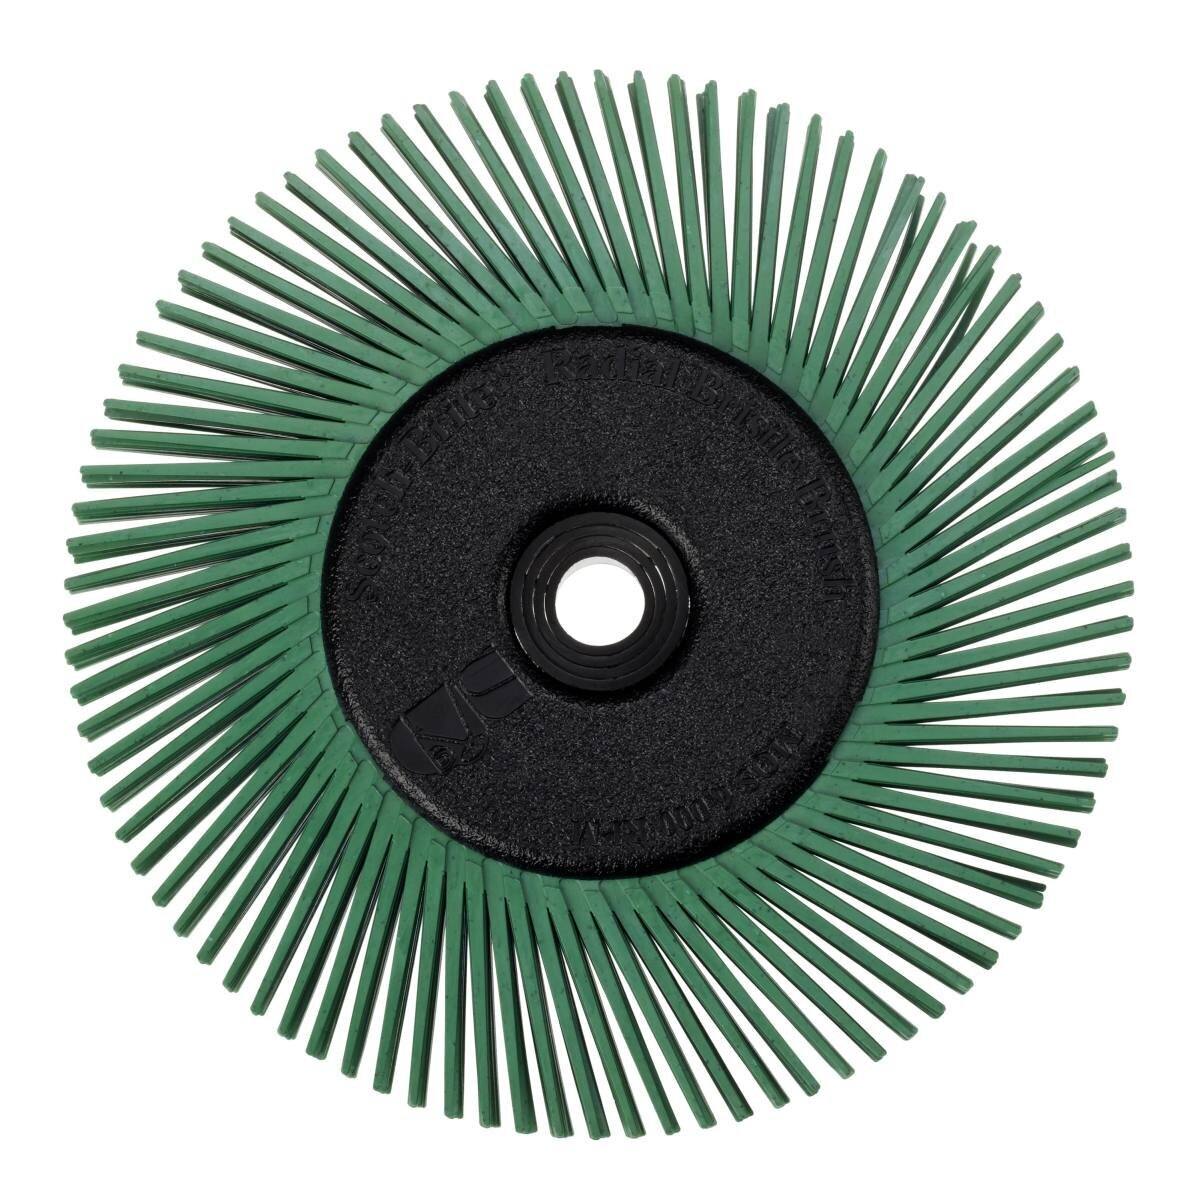 3M Scotch-Brite Radial Bristle Disc BB-ZB with flange, green, 152.4 mm, P50, Type A #27605